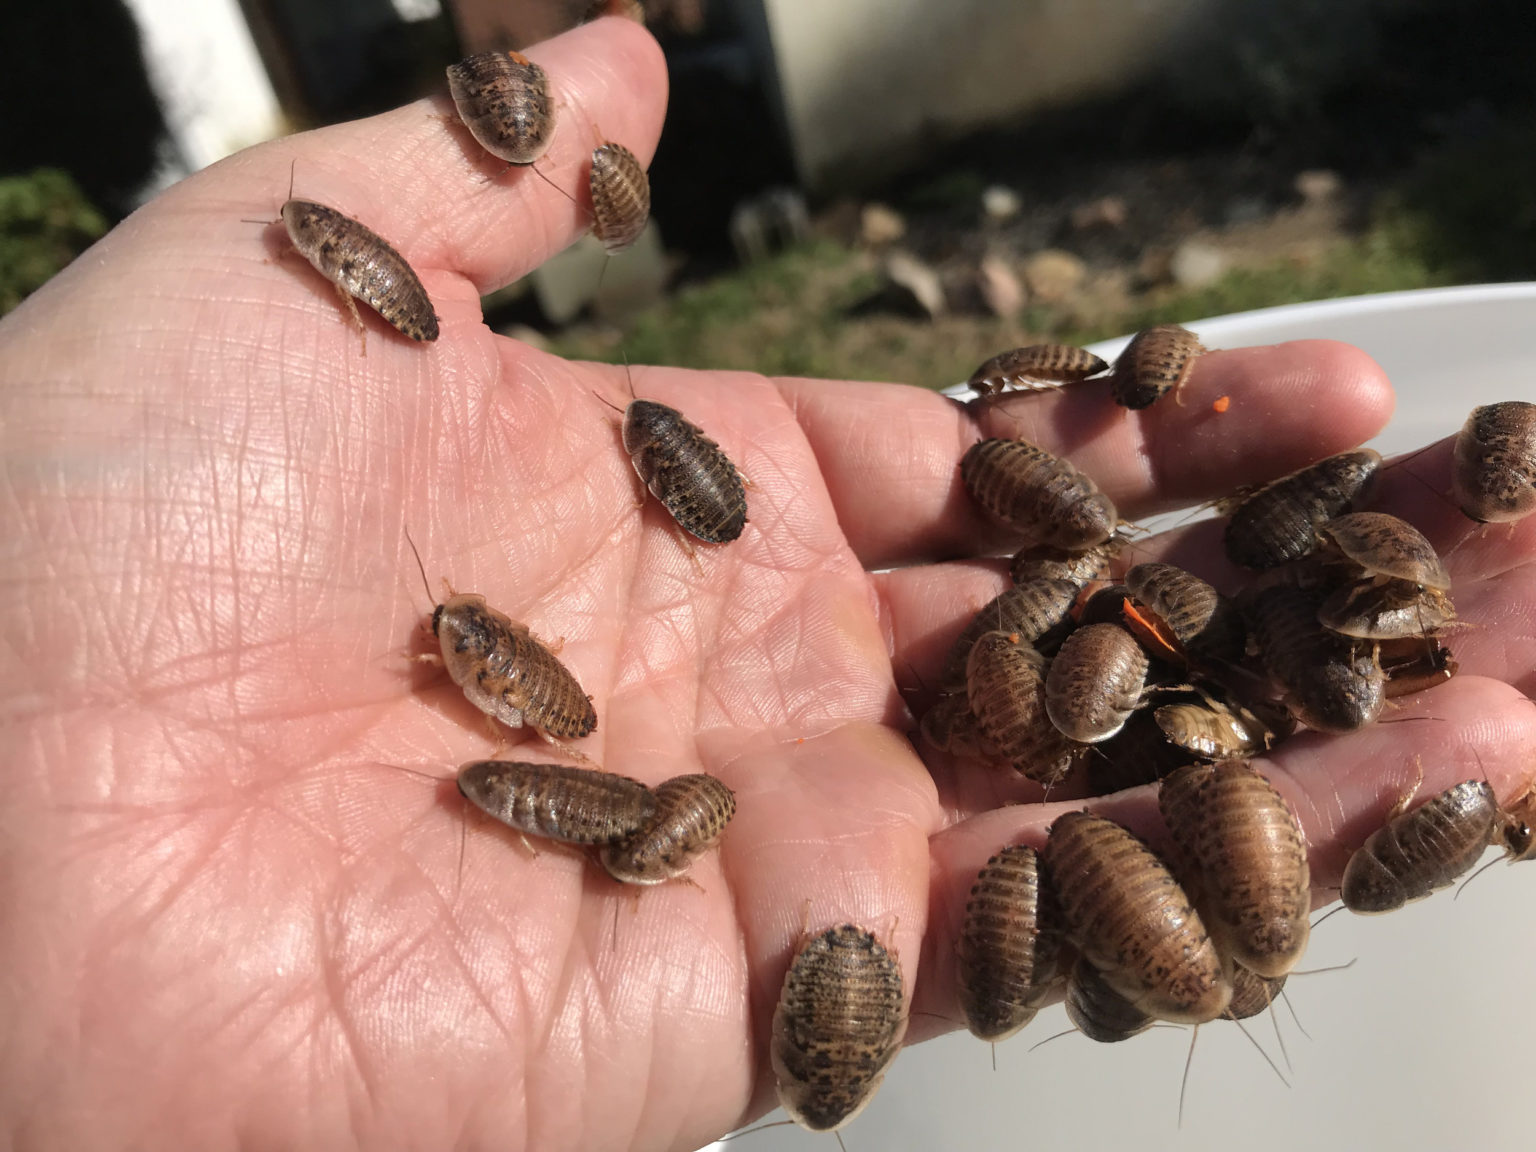 A bunch of bugs crawling on a persons hand